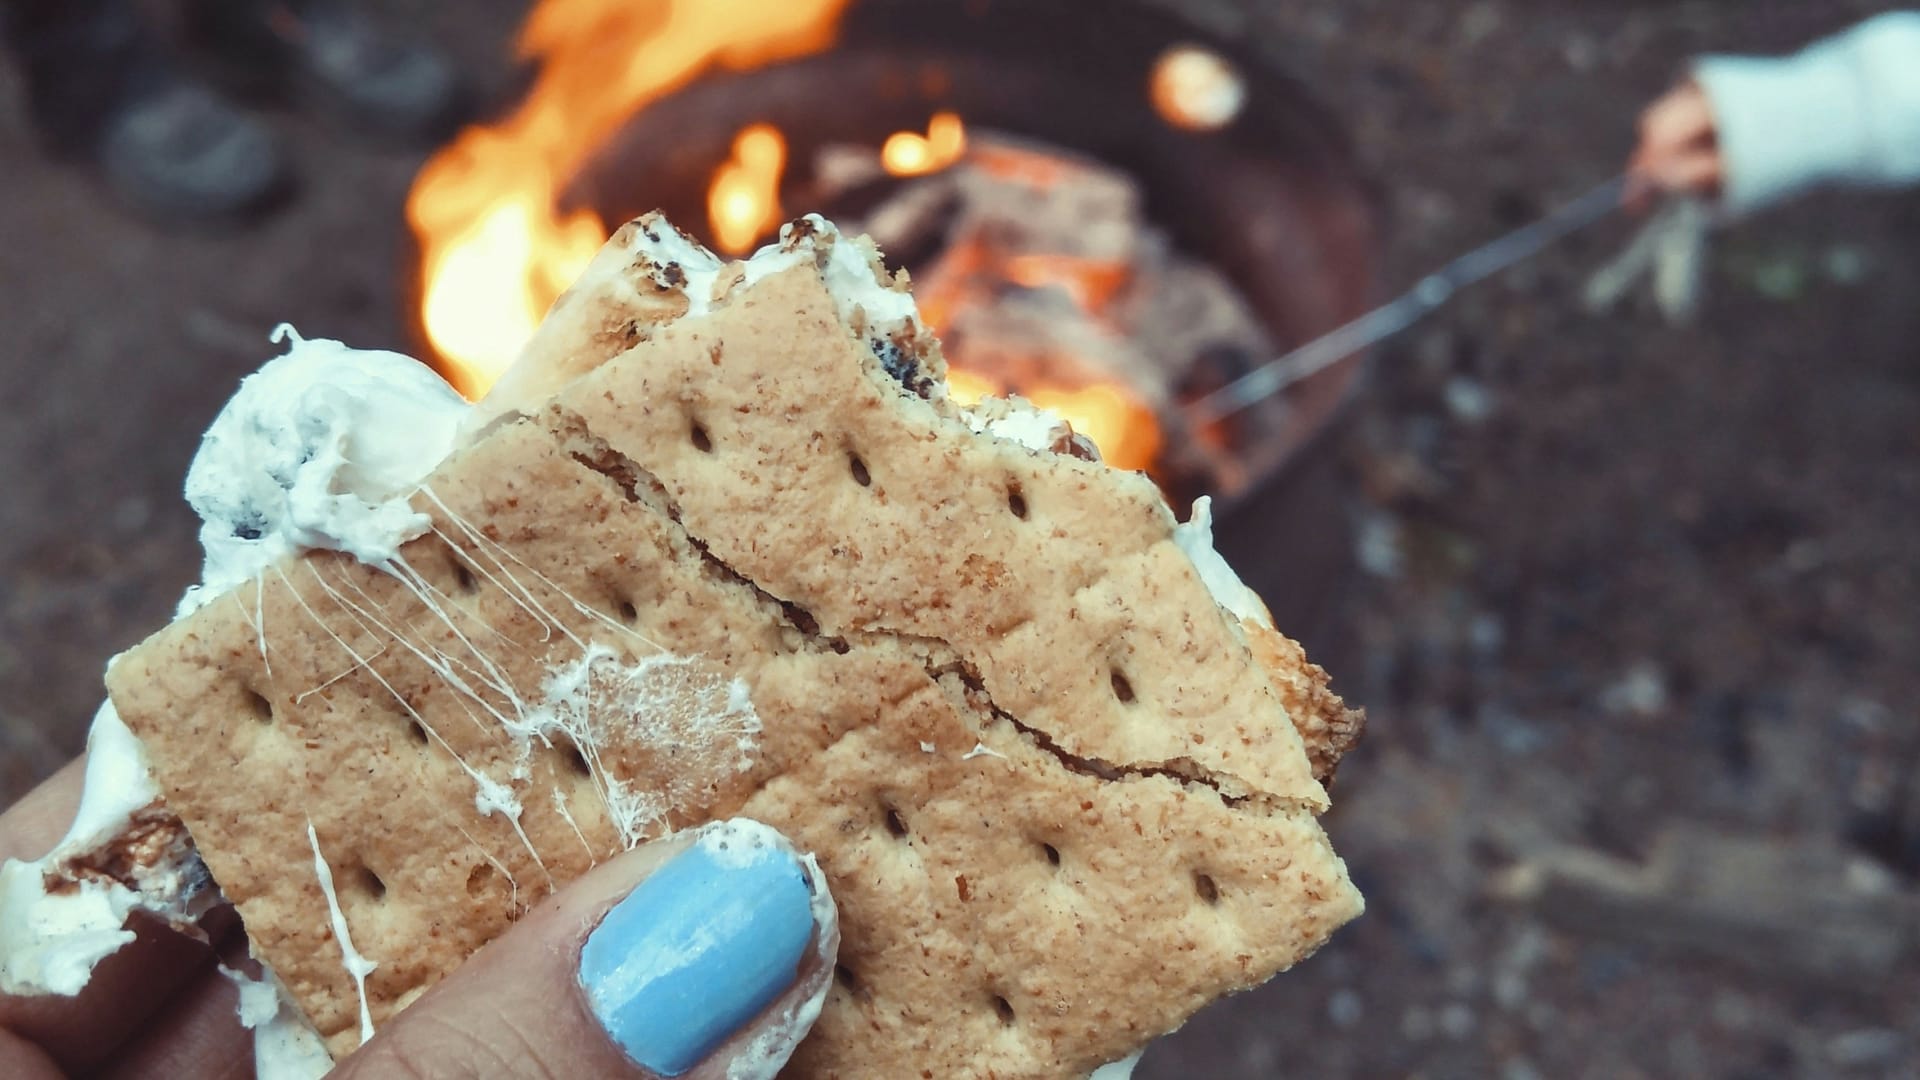 A big, thick, gooey smores being held by a woman's hand with pink fingernails, with someone cooking camping food at the fire in the background. Image by Autumn Mott.